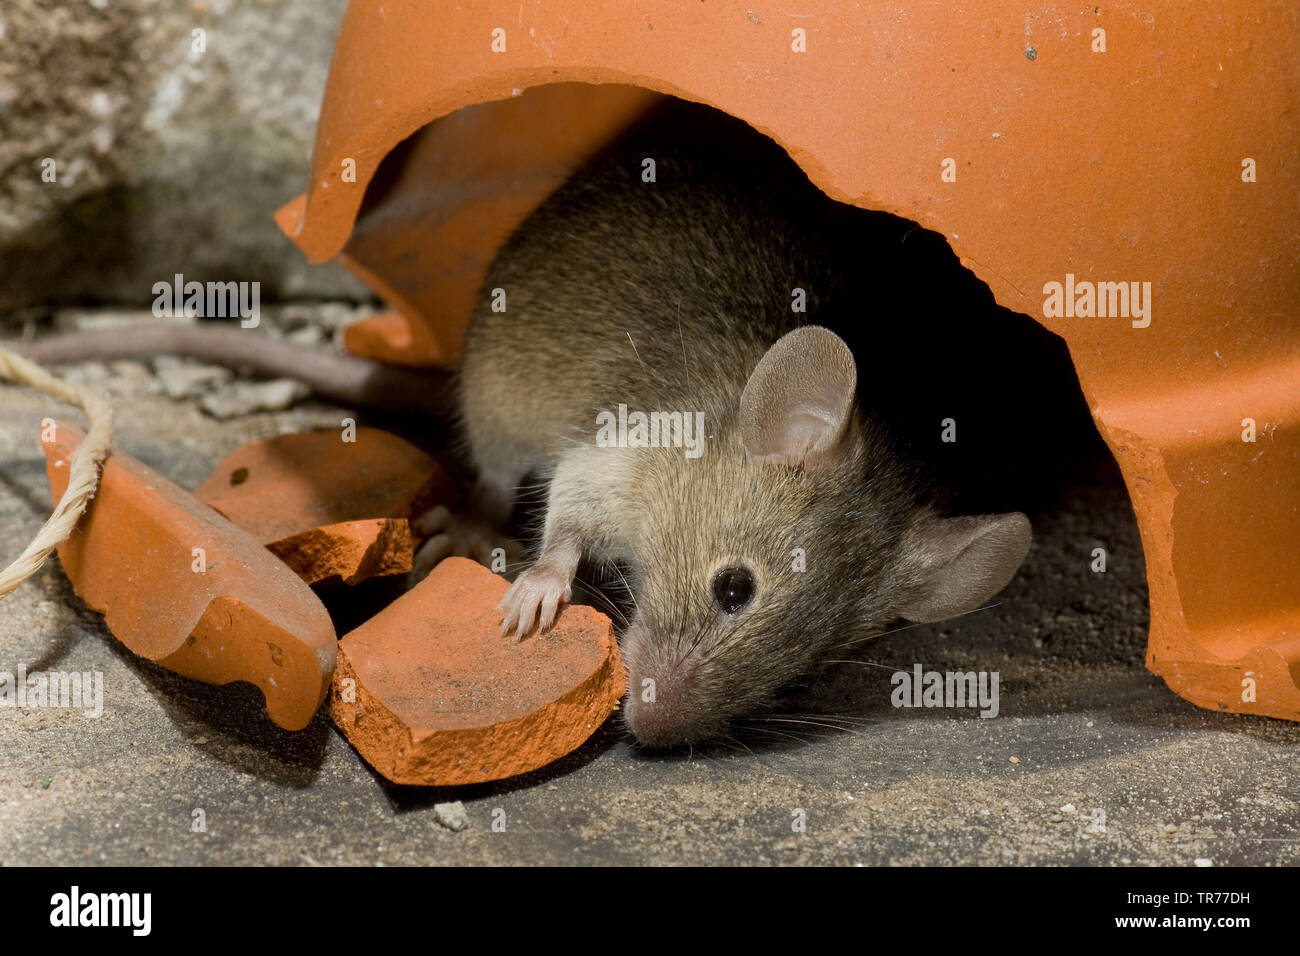 house mouse (Mus musculus), sniffing under a broken clay pot, Netherlands Stock Photo